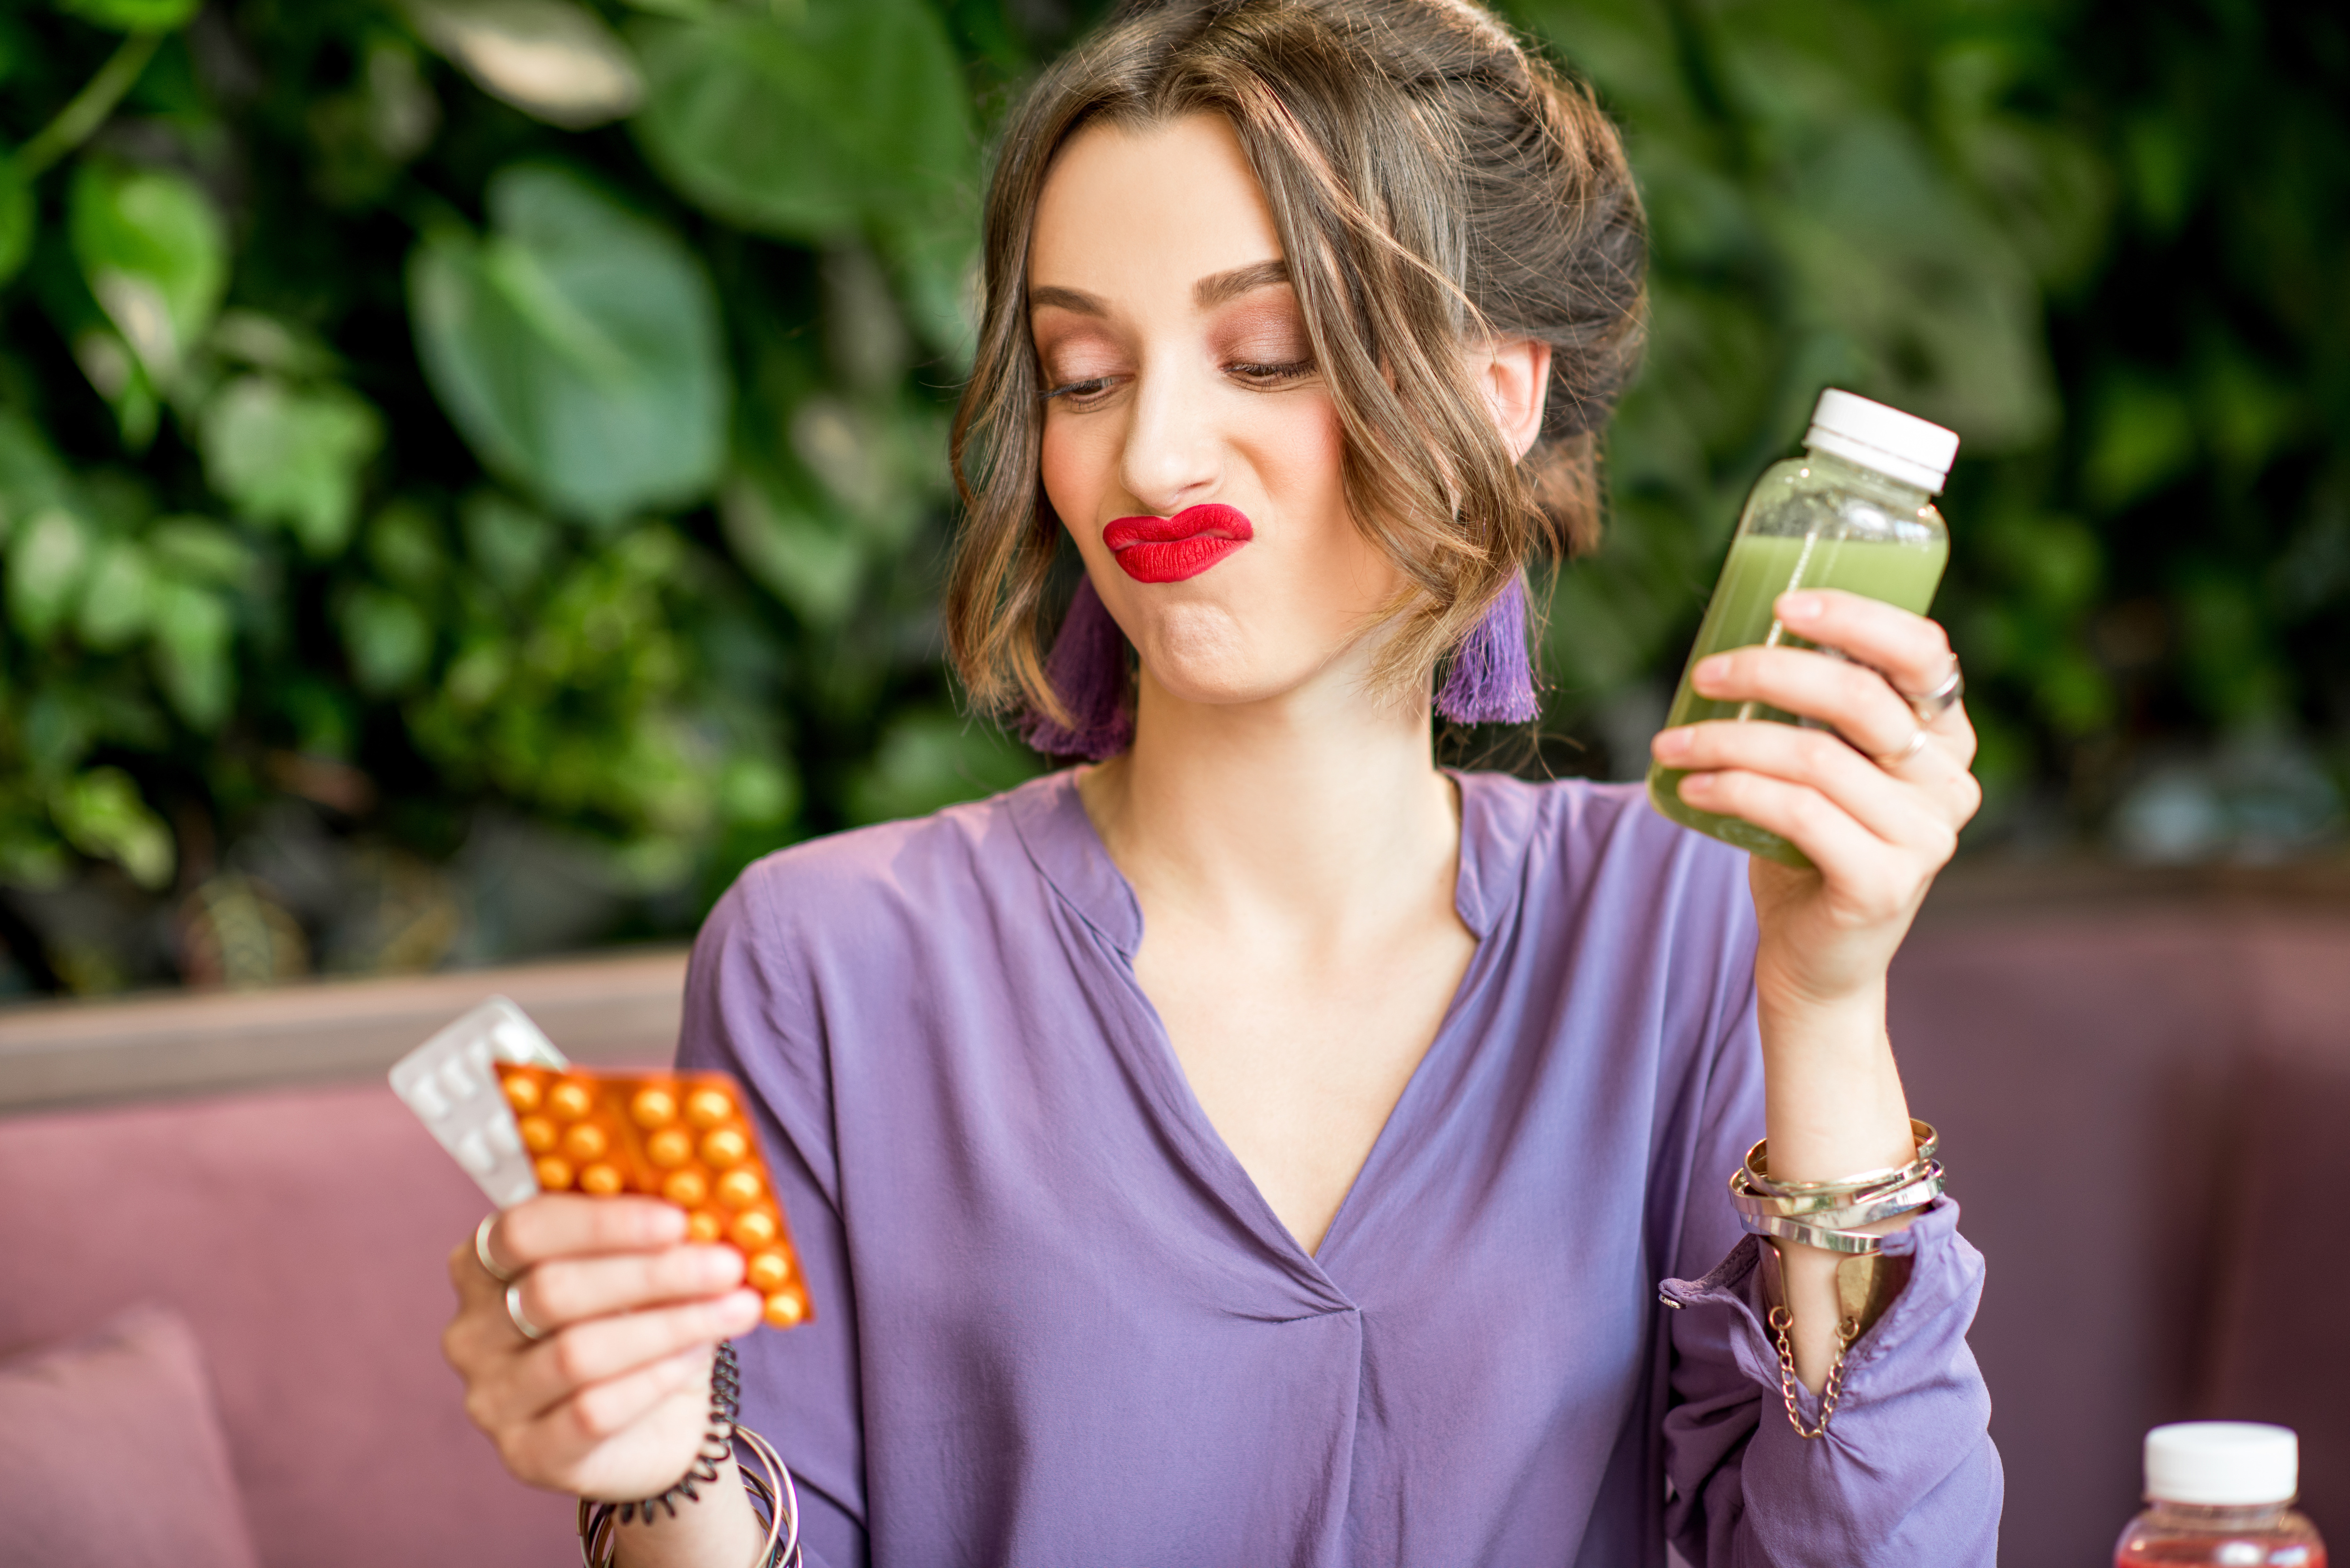 Woman looks undecided at blister packs of pills, while holding a smoothie with her other hand